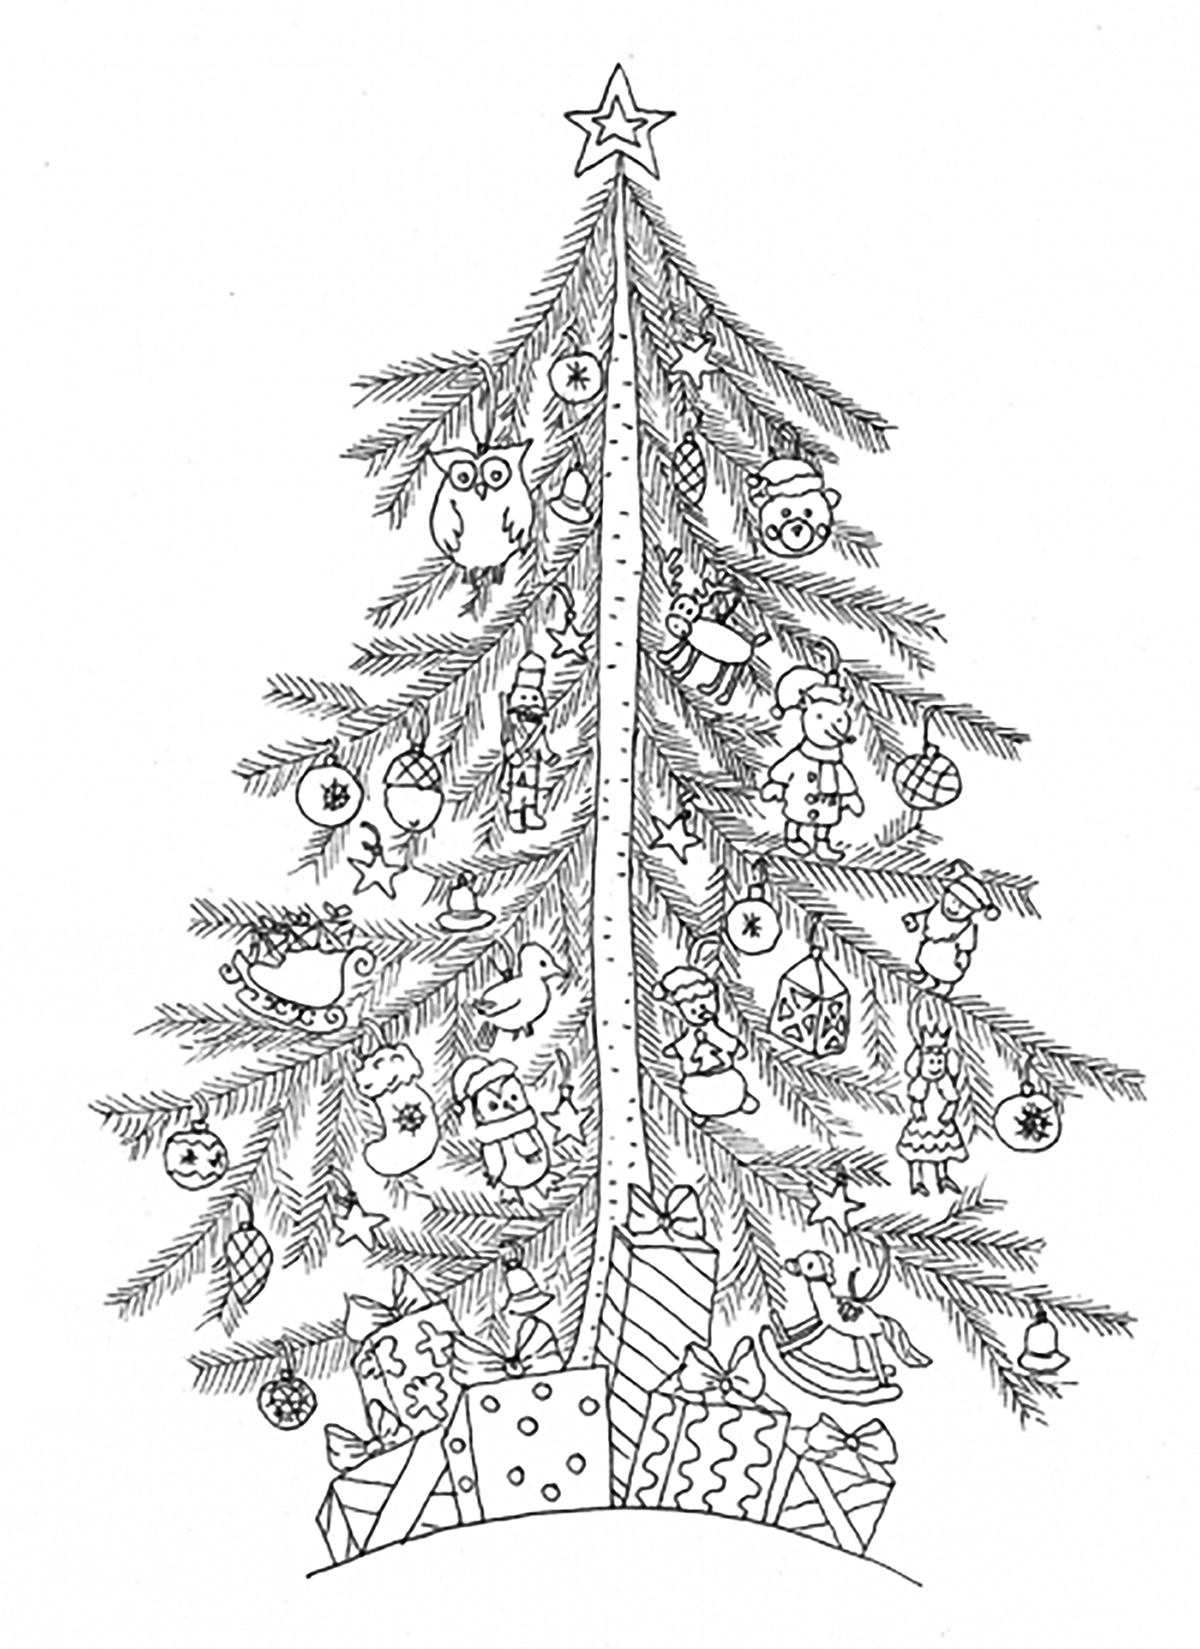 Christmas tree - Christmas Coloring pages for kids to print & color